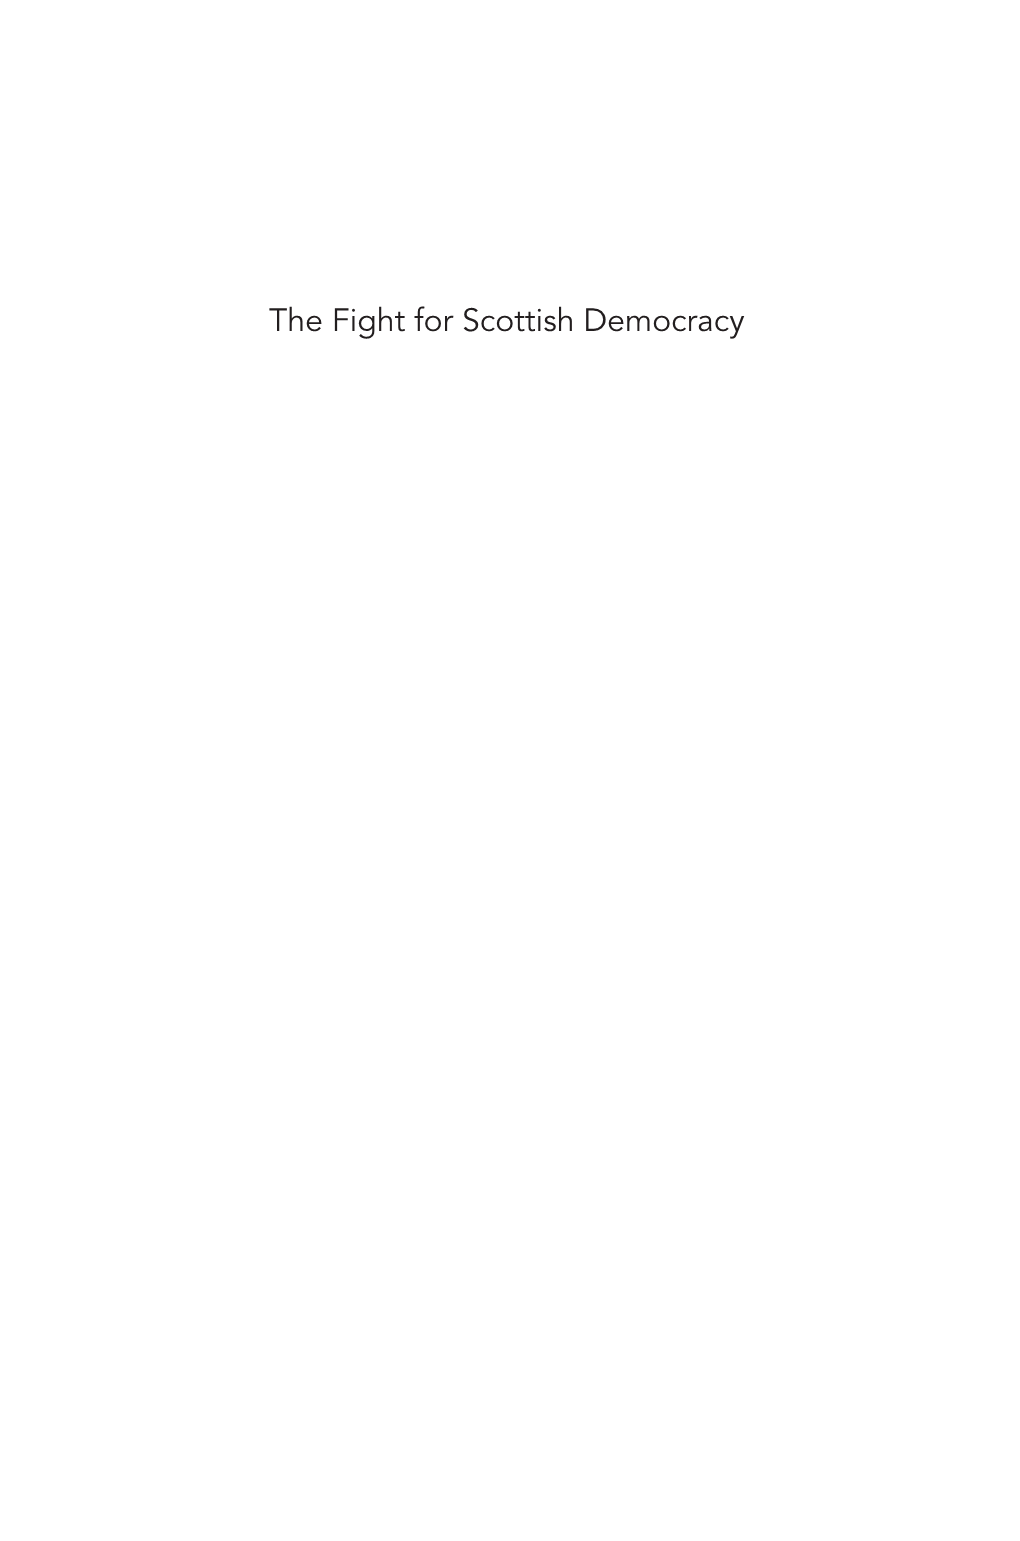 The Fight for Scottish Democracy the Fight for Scottish Democracy Rebellion and Reform in 1820